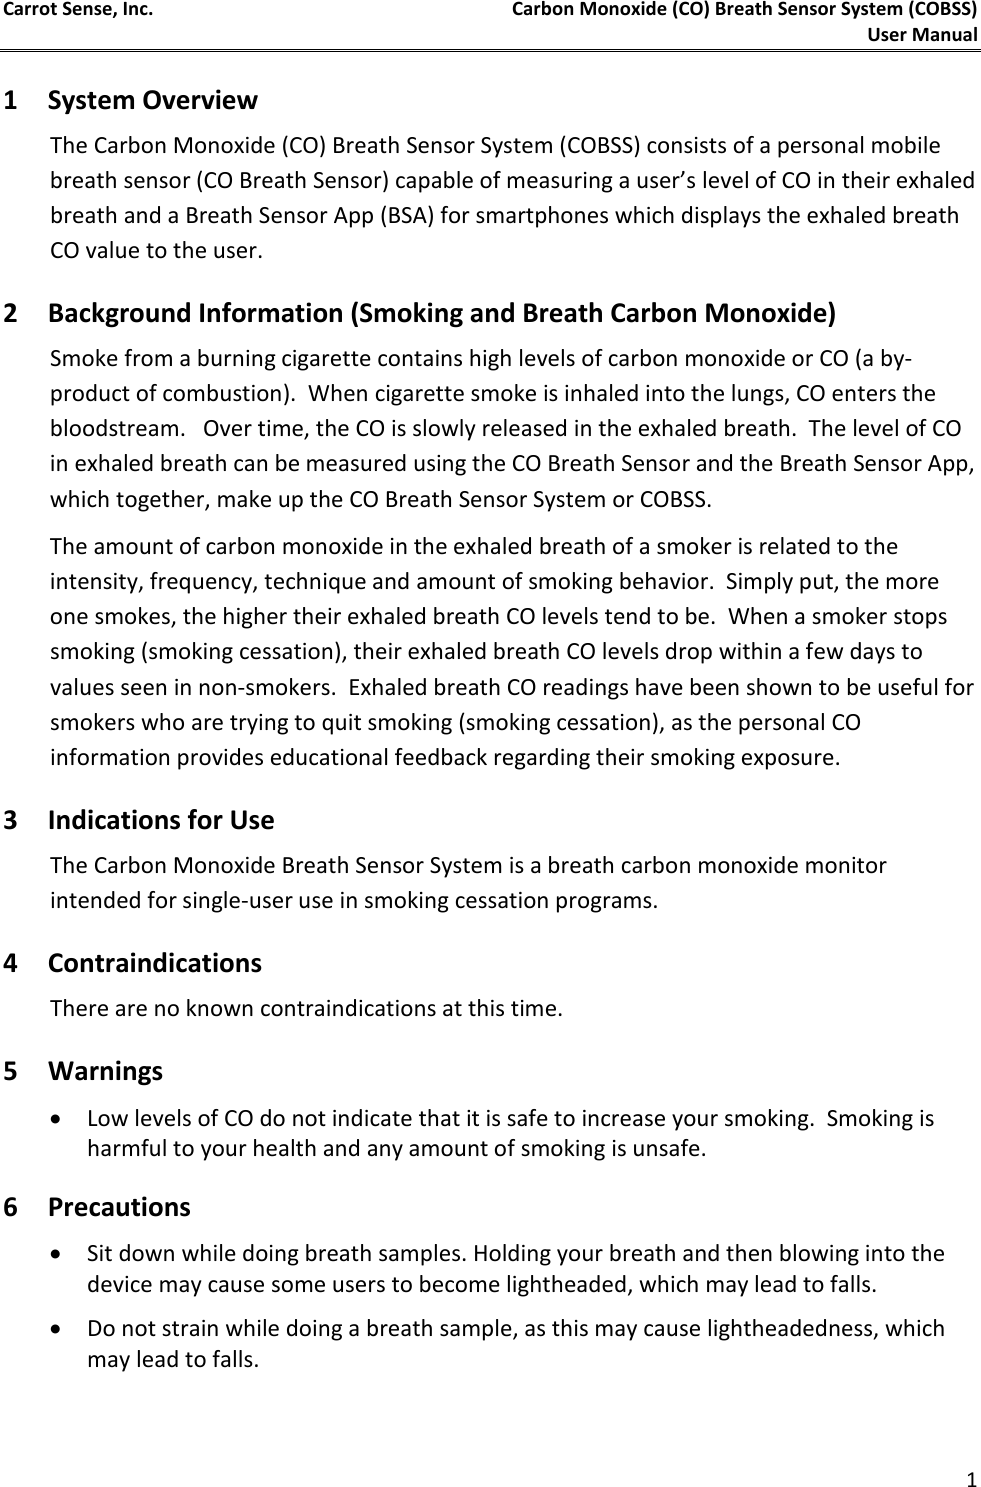 Carrot Sense, Inc. Carbon Monoxide (CO) Breath Sensor System (COBSS)  User Manual   1 1 System Overview The Carbon Monoxide (CO) Breath Sensor System (COBSS) consists of a personal mobile breath sensor (CO Breath Sensor) capable of measuring a user’s level of CO in their exhaled breath and a Breath Sensor App (BSA) for smartphones which displays the exhaled breath CO value to the user.  2 Background Information (Smoking and Breath Carbon Monoxide) Smoke from a burning cigarette contains high levels of carbon monoxide or CO (a by-product of combustion).  When cigarette smoke is inhaled into the lungs, CO enters the bloodstream.   Over time, the CO is slowly released in the exhaled breath.  The level of CO in exhaled breath can be measured using the CO Breath Sensor and the Breath Sensor App, which together, make up the CO Breath Sensor System or COBSS. The amount of carbon monoxide in the exhaled breath of a smoker is related to the intensity, frequency, technique and amount of smoking behavior.  Simply put, the more one smokes, the higher their exhaled breath CO levels tend to be.  When a smoker stops smoking (smoking cessation), their exhaled breath CO levels drop within a few days to values seen in non-smokers.  Exhaled breath CO readings have been shown to be useful for smokers who are trying to quit smoking (smoking cessation), as the personal CO information provides educational feedback regarding their smoking exposure. 3 Indications for Use The Carbon Monoxide Breath Sensor System is a breath carbon monoxide monitor intended for single-user use in smoking cessation programs.  4 Contraindications There are no known contraindications at this time.  5 Warnings  • Low levels of CO do not indicate that it is safe to increase your smoking.  Smoking is harmful to your health and any amount of smoking is unsafe. 6 Precautions • Sit down while doing breath samples. Holding your breath and then blowing into the device may cause some users to become lightheaded, which may lead to falls.  • Do not strain while doing a breath sample, as this may cause lightheadedness, which may lead to falls. 